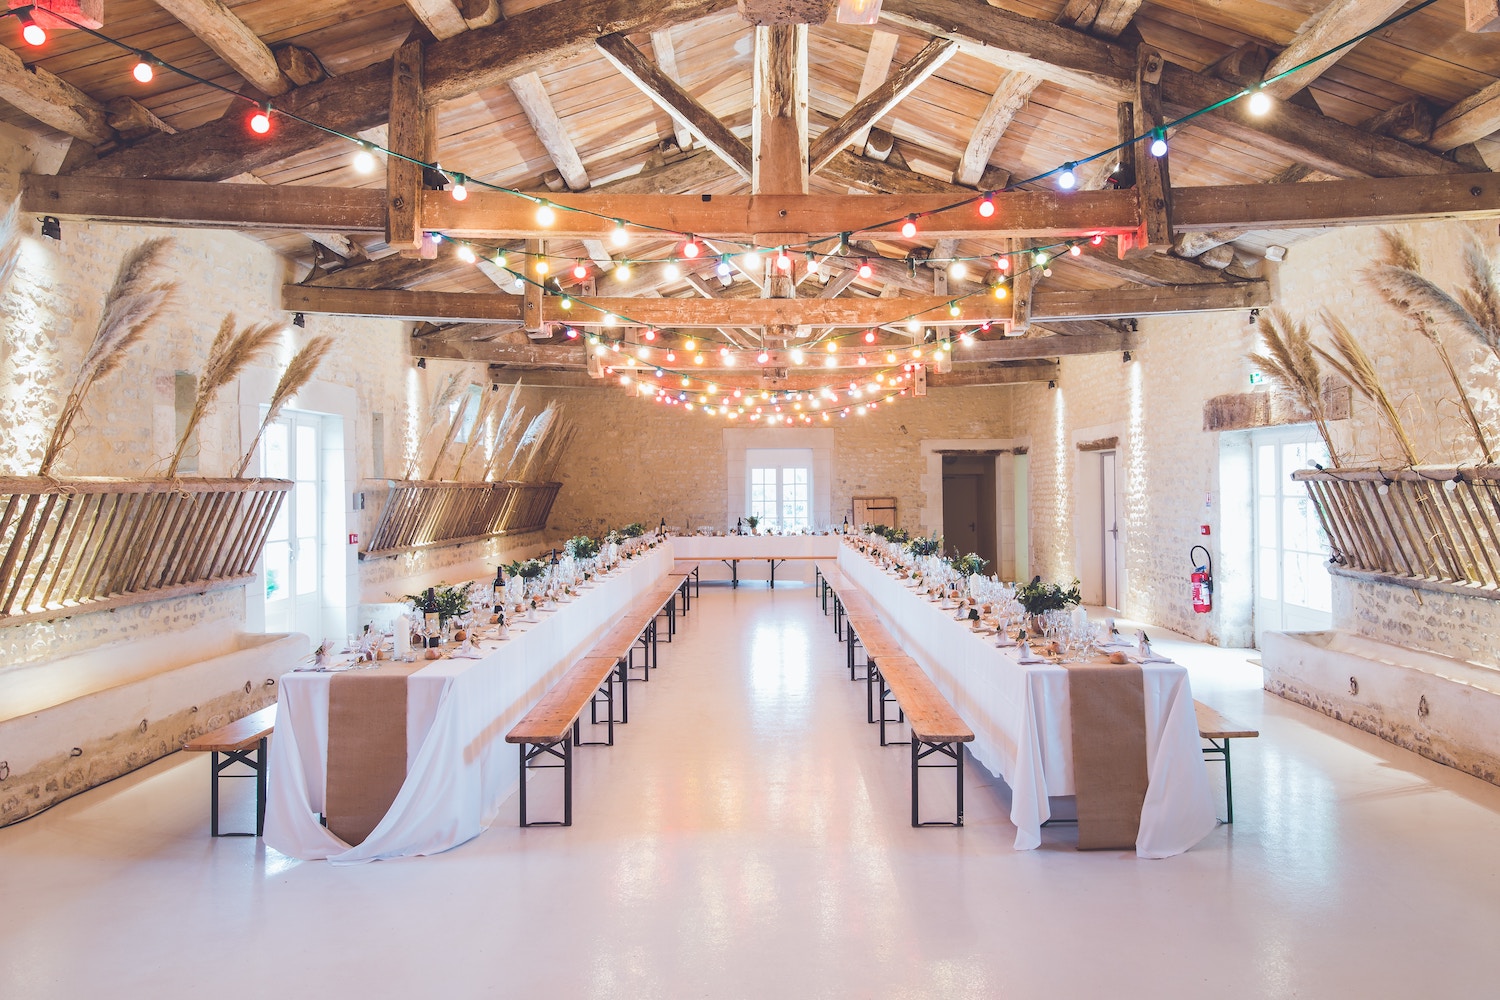 How Much Do Wedding Venues Cost?